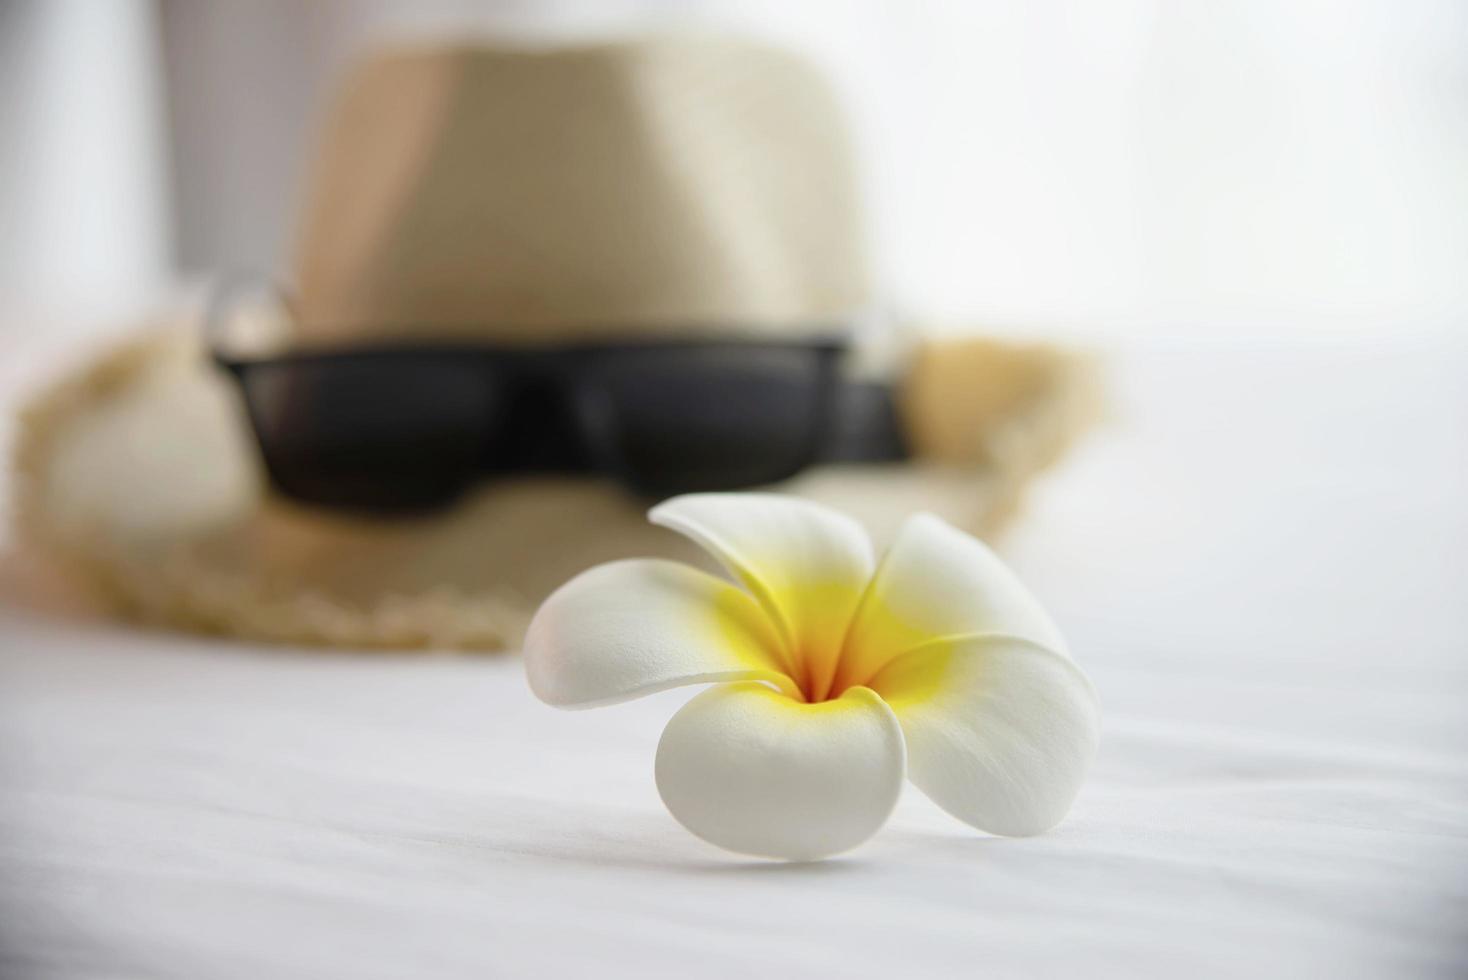 Tourist stuff hat sun glasses and plumeria flower in white bed room - happy relax vacation holiday and hotel concept photo